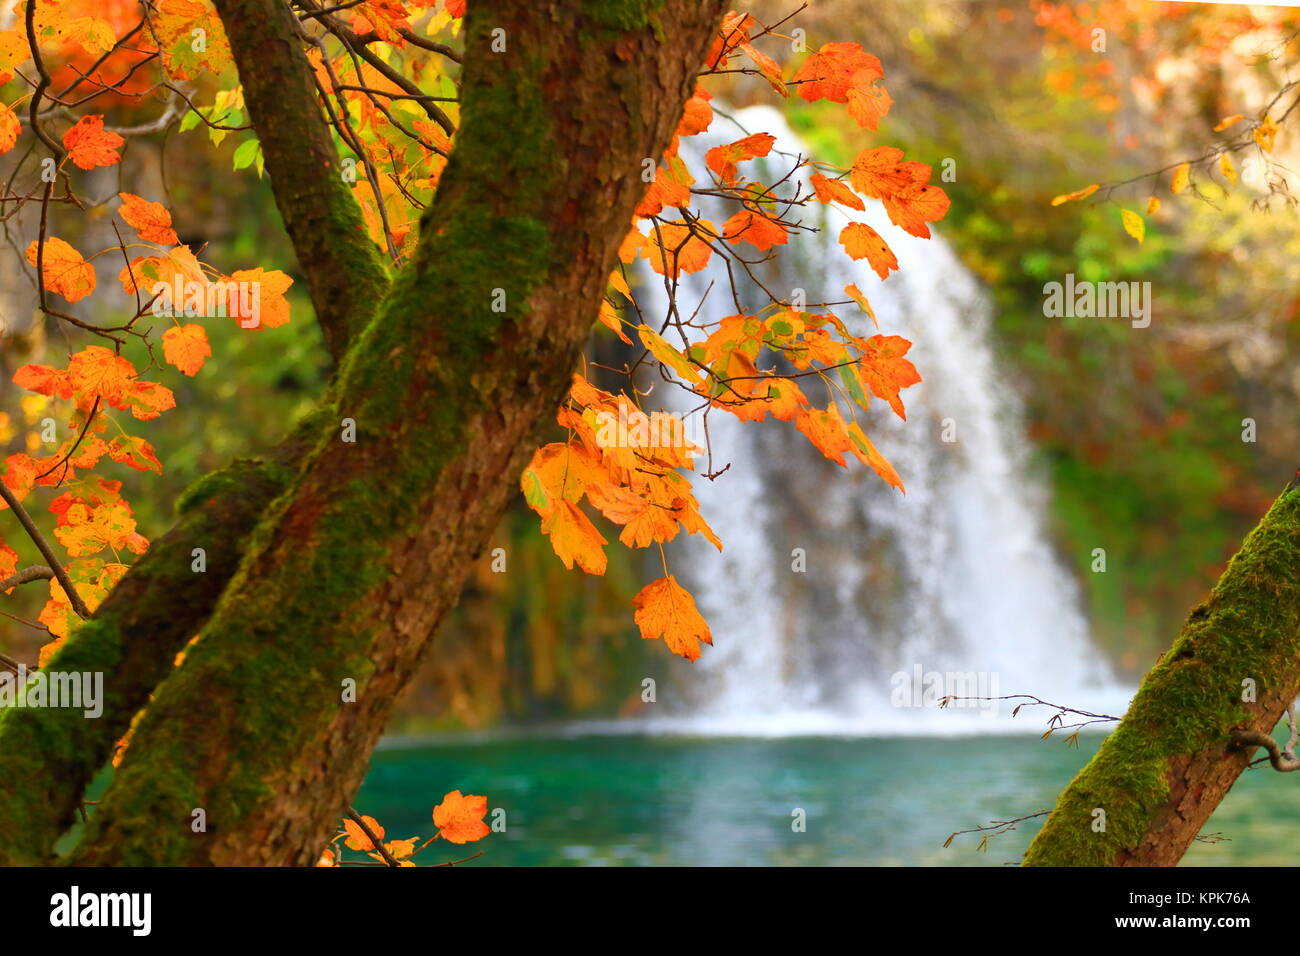 Beautiful nature in autumn, National park Plitvice lakes, Croatia, fall  leaves and blurred waterfall in background Stock Photo - Alamy